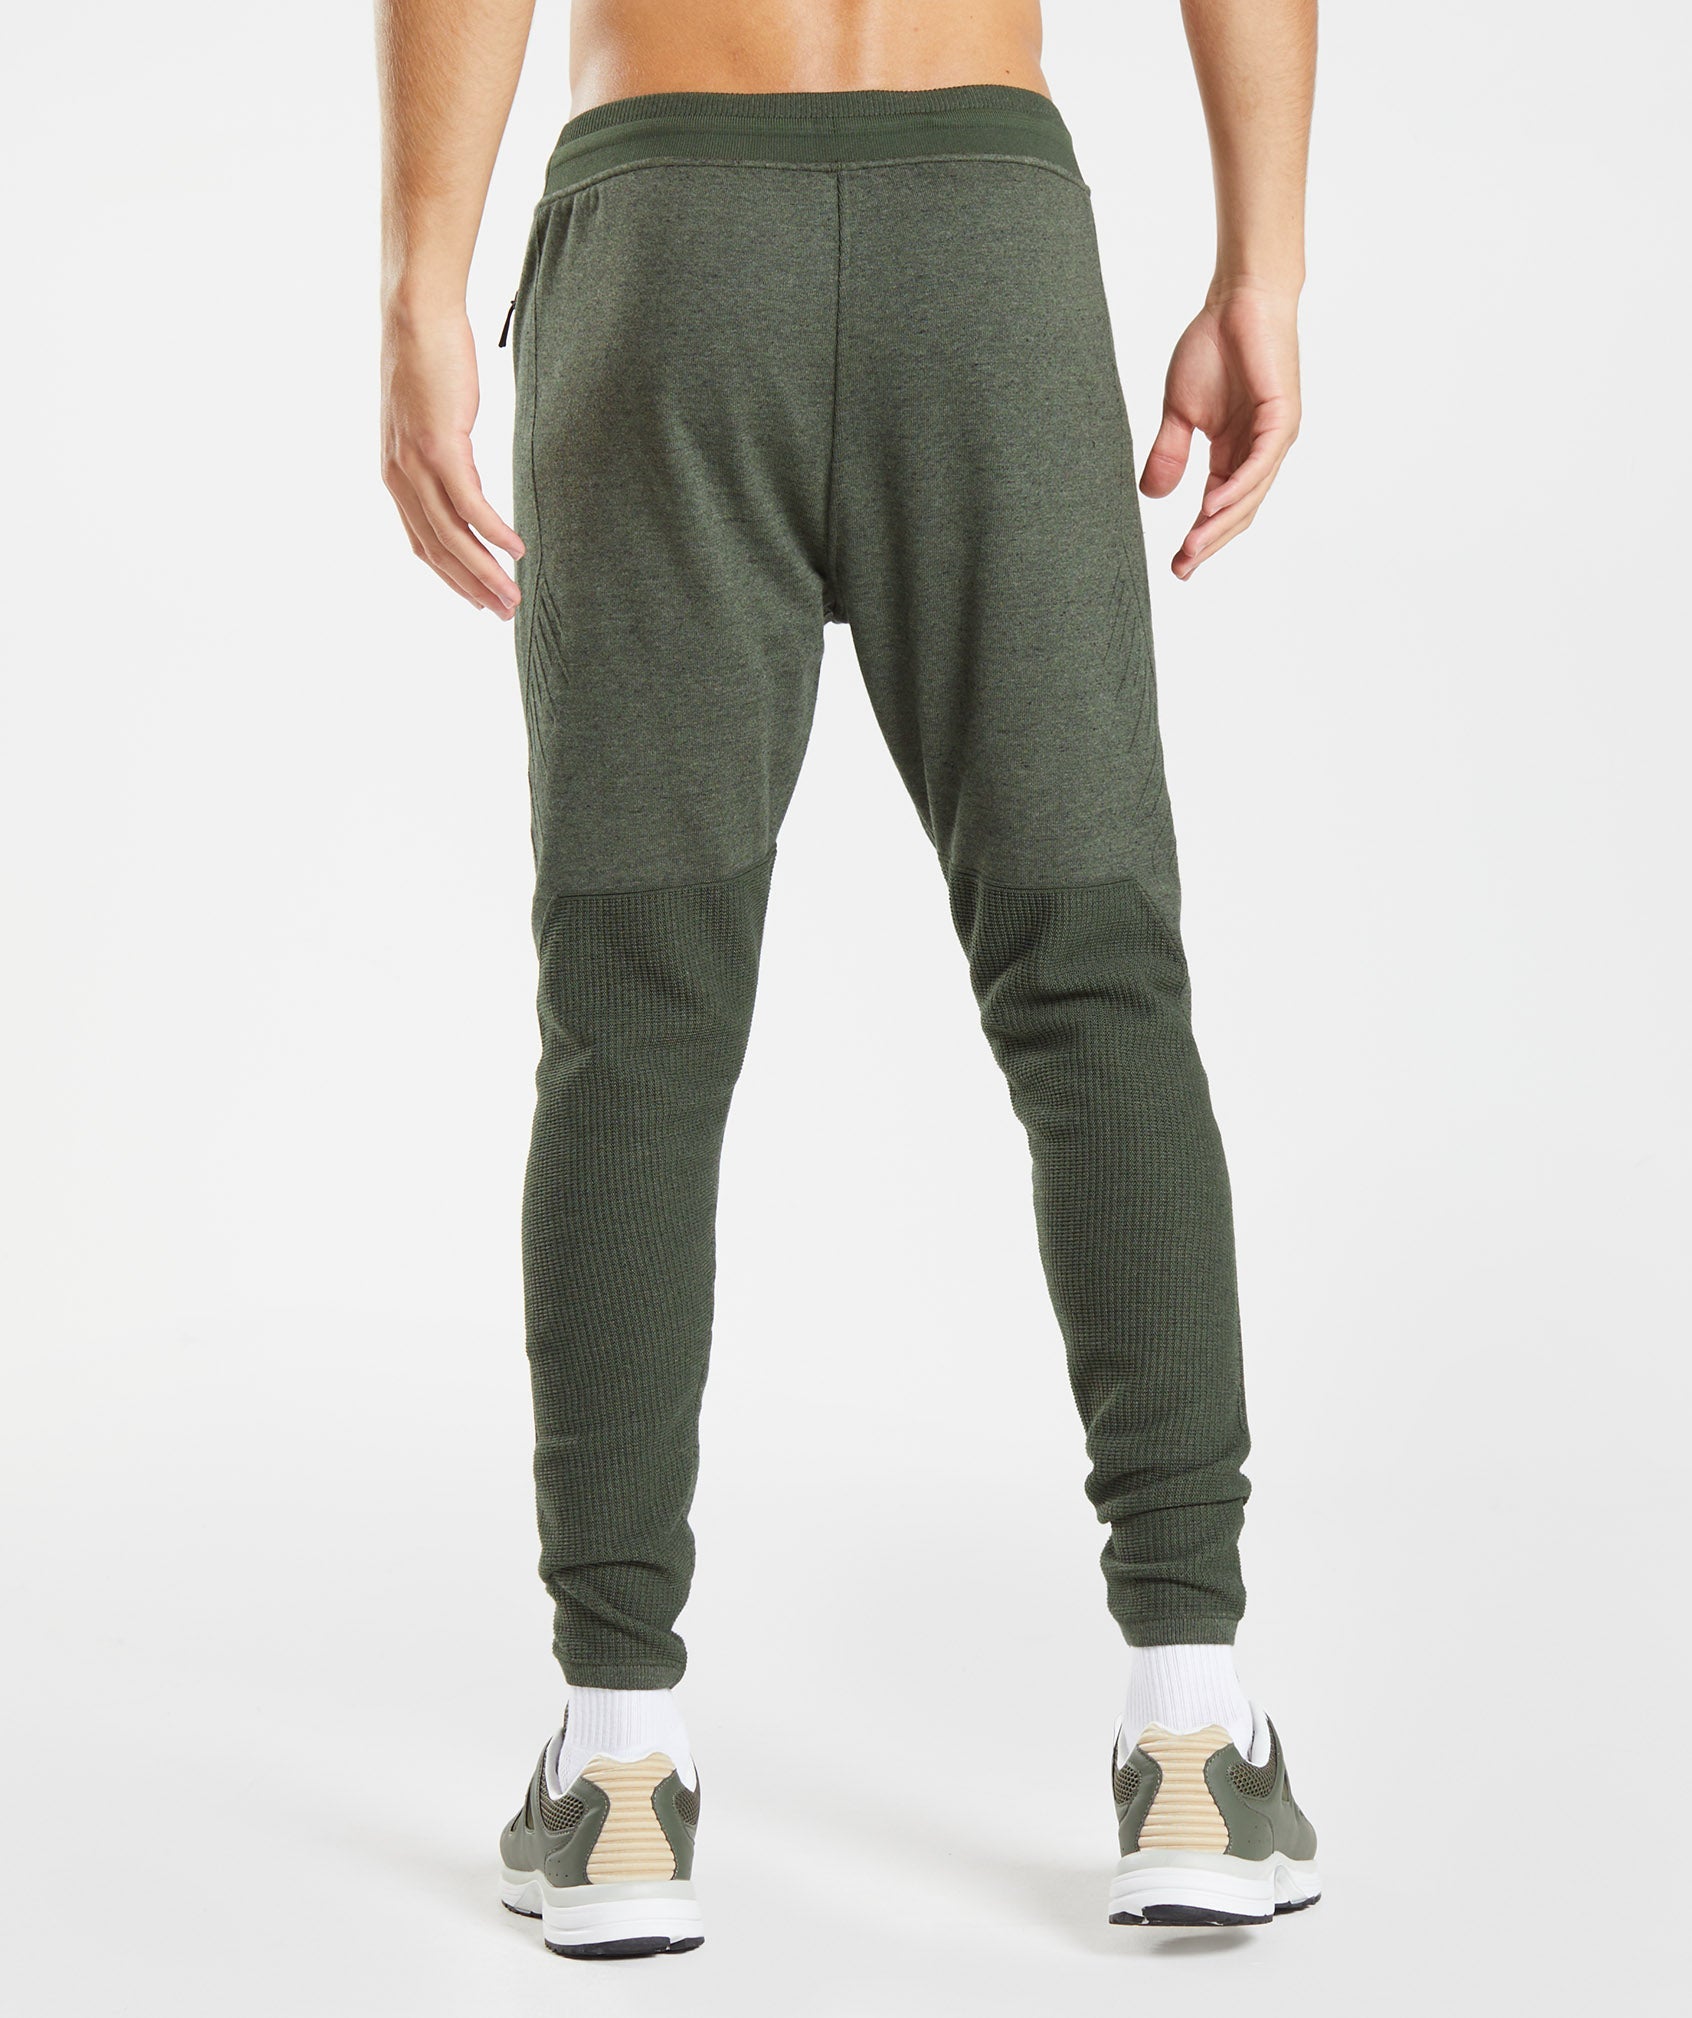 Gymshark Apollo Muscle Fit Joggers - Core Olive